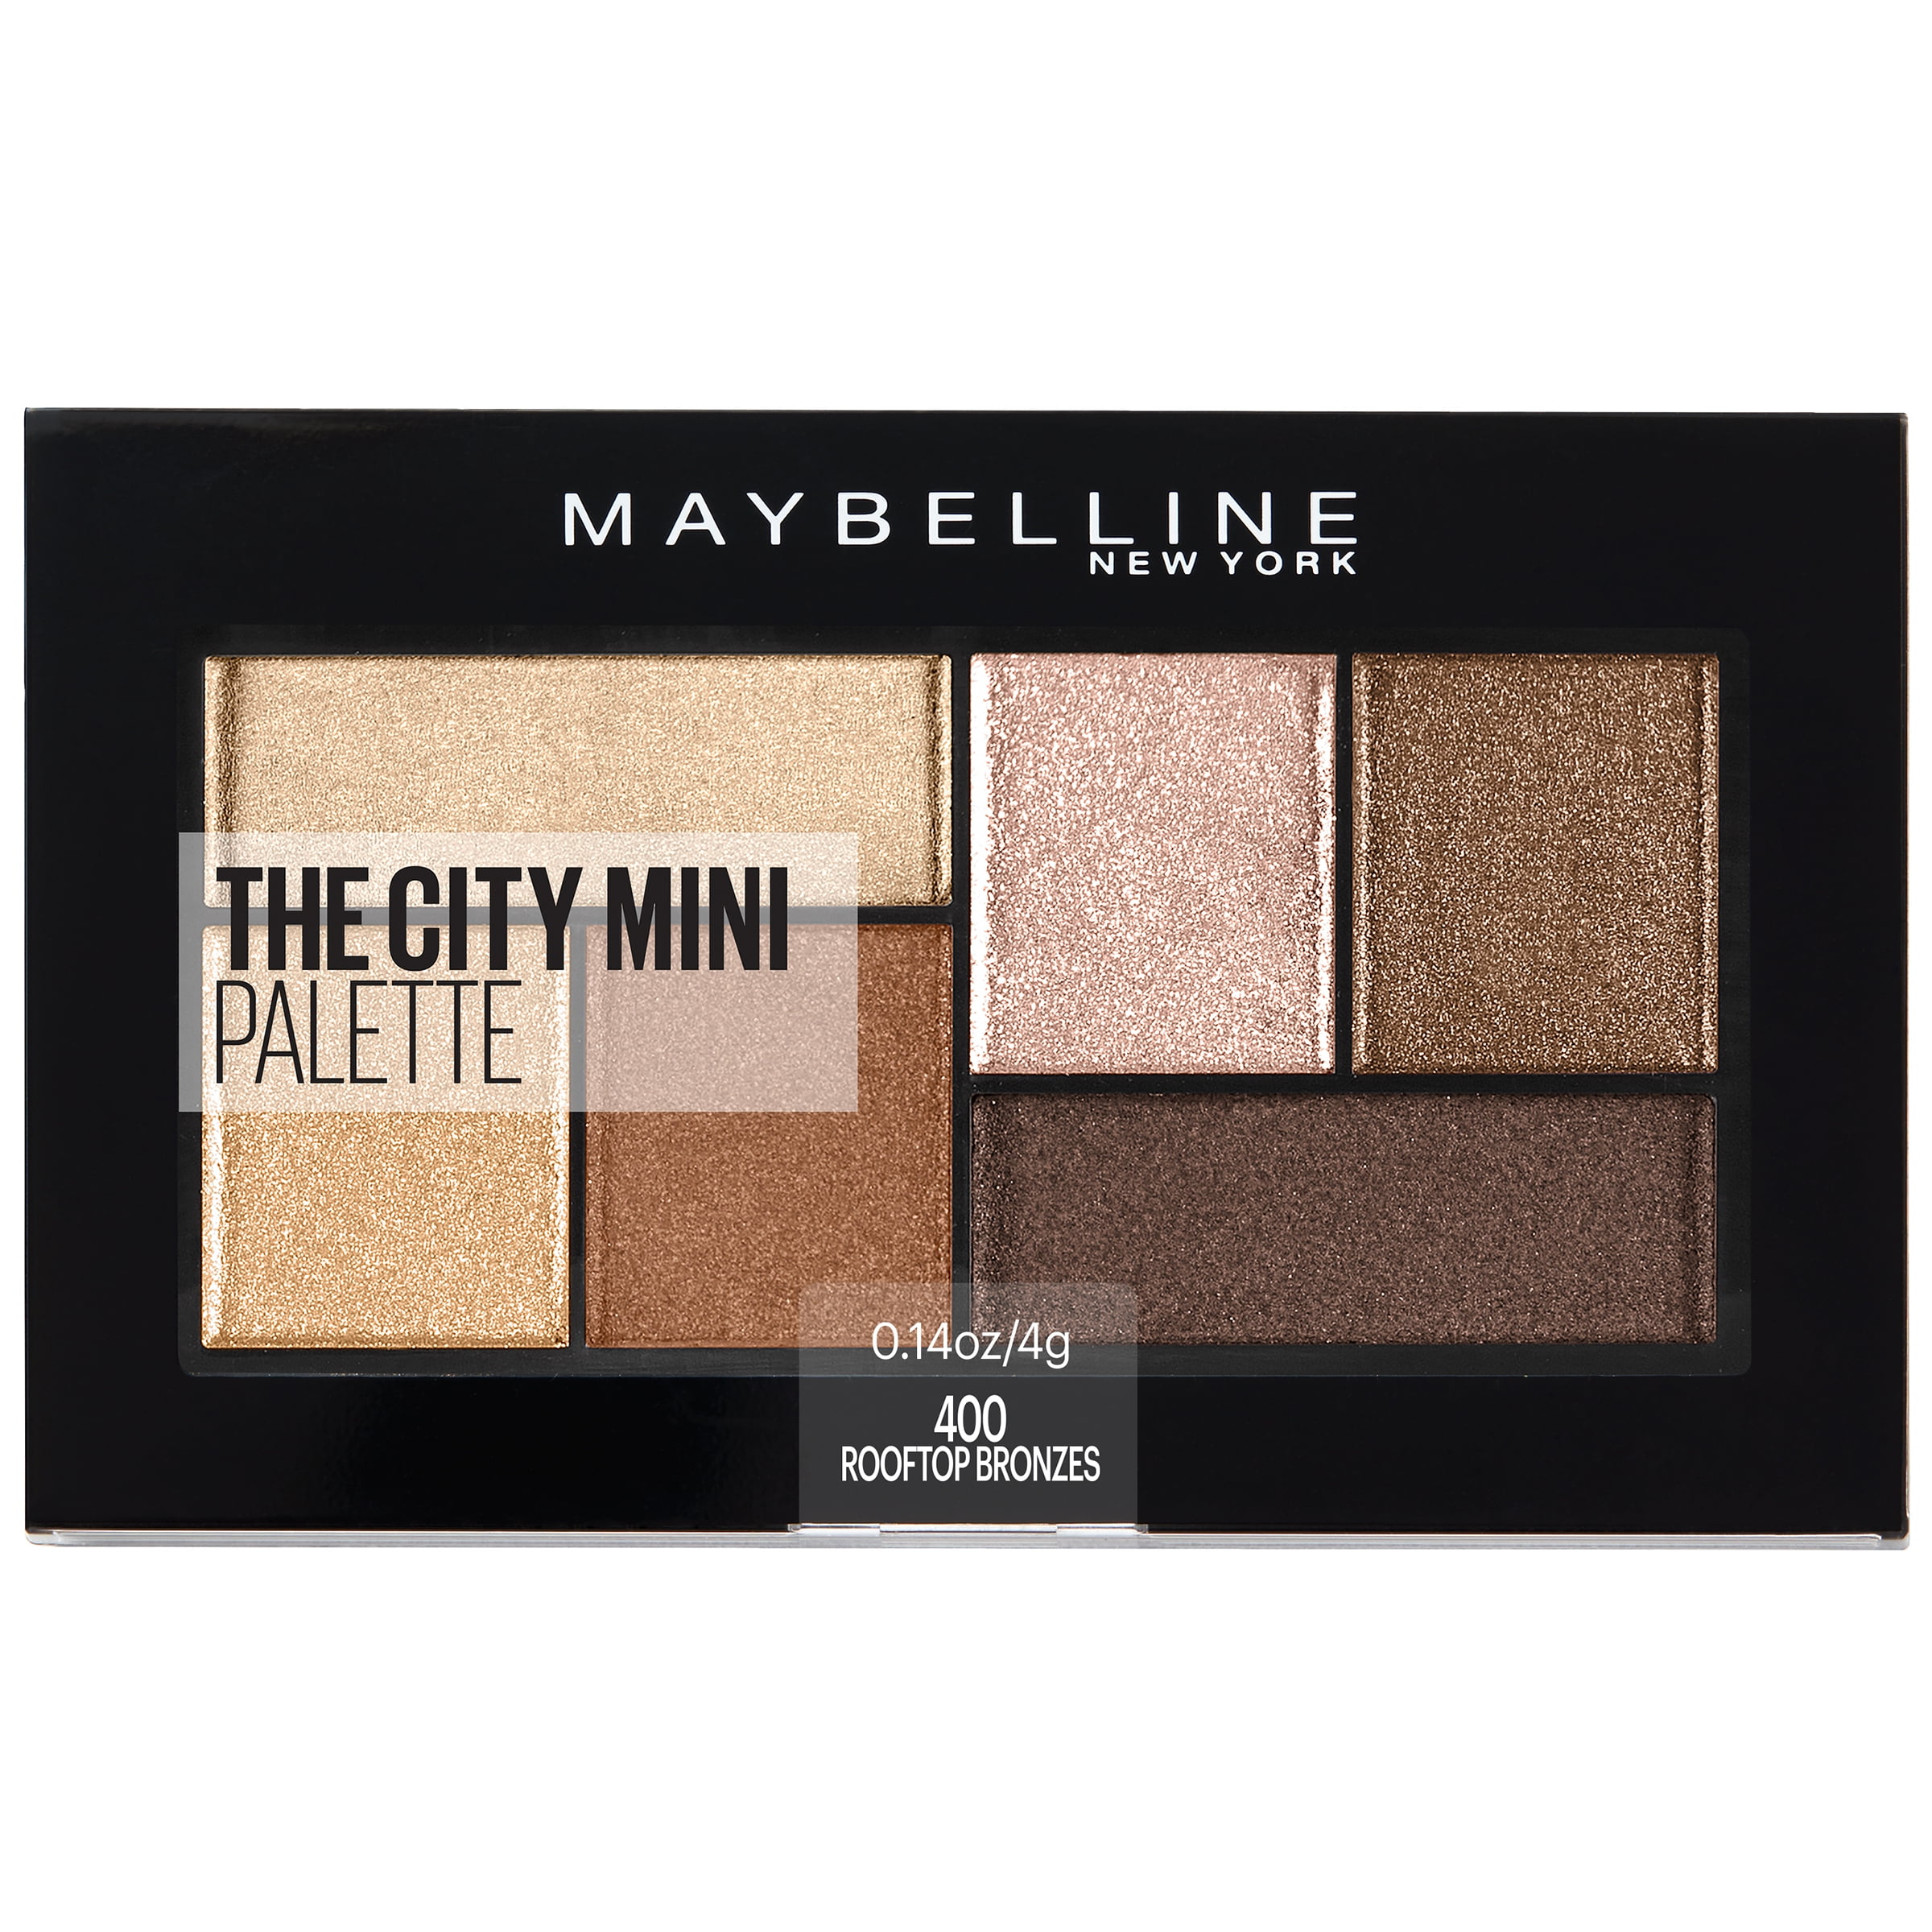 Maybelline The City Mini Eyeshadow Palette Makeup, Rooftop Bronzes, 0.14 oz